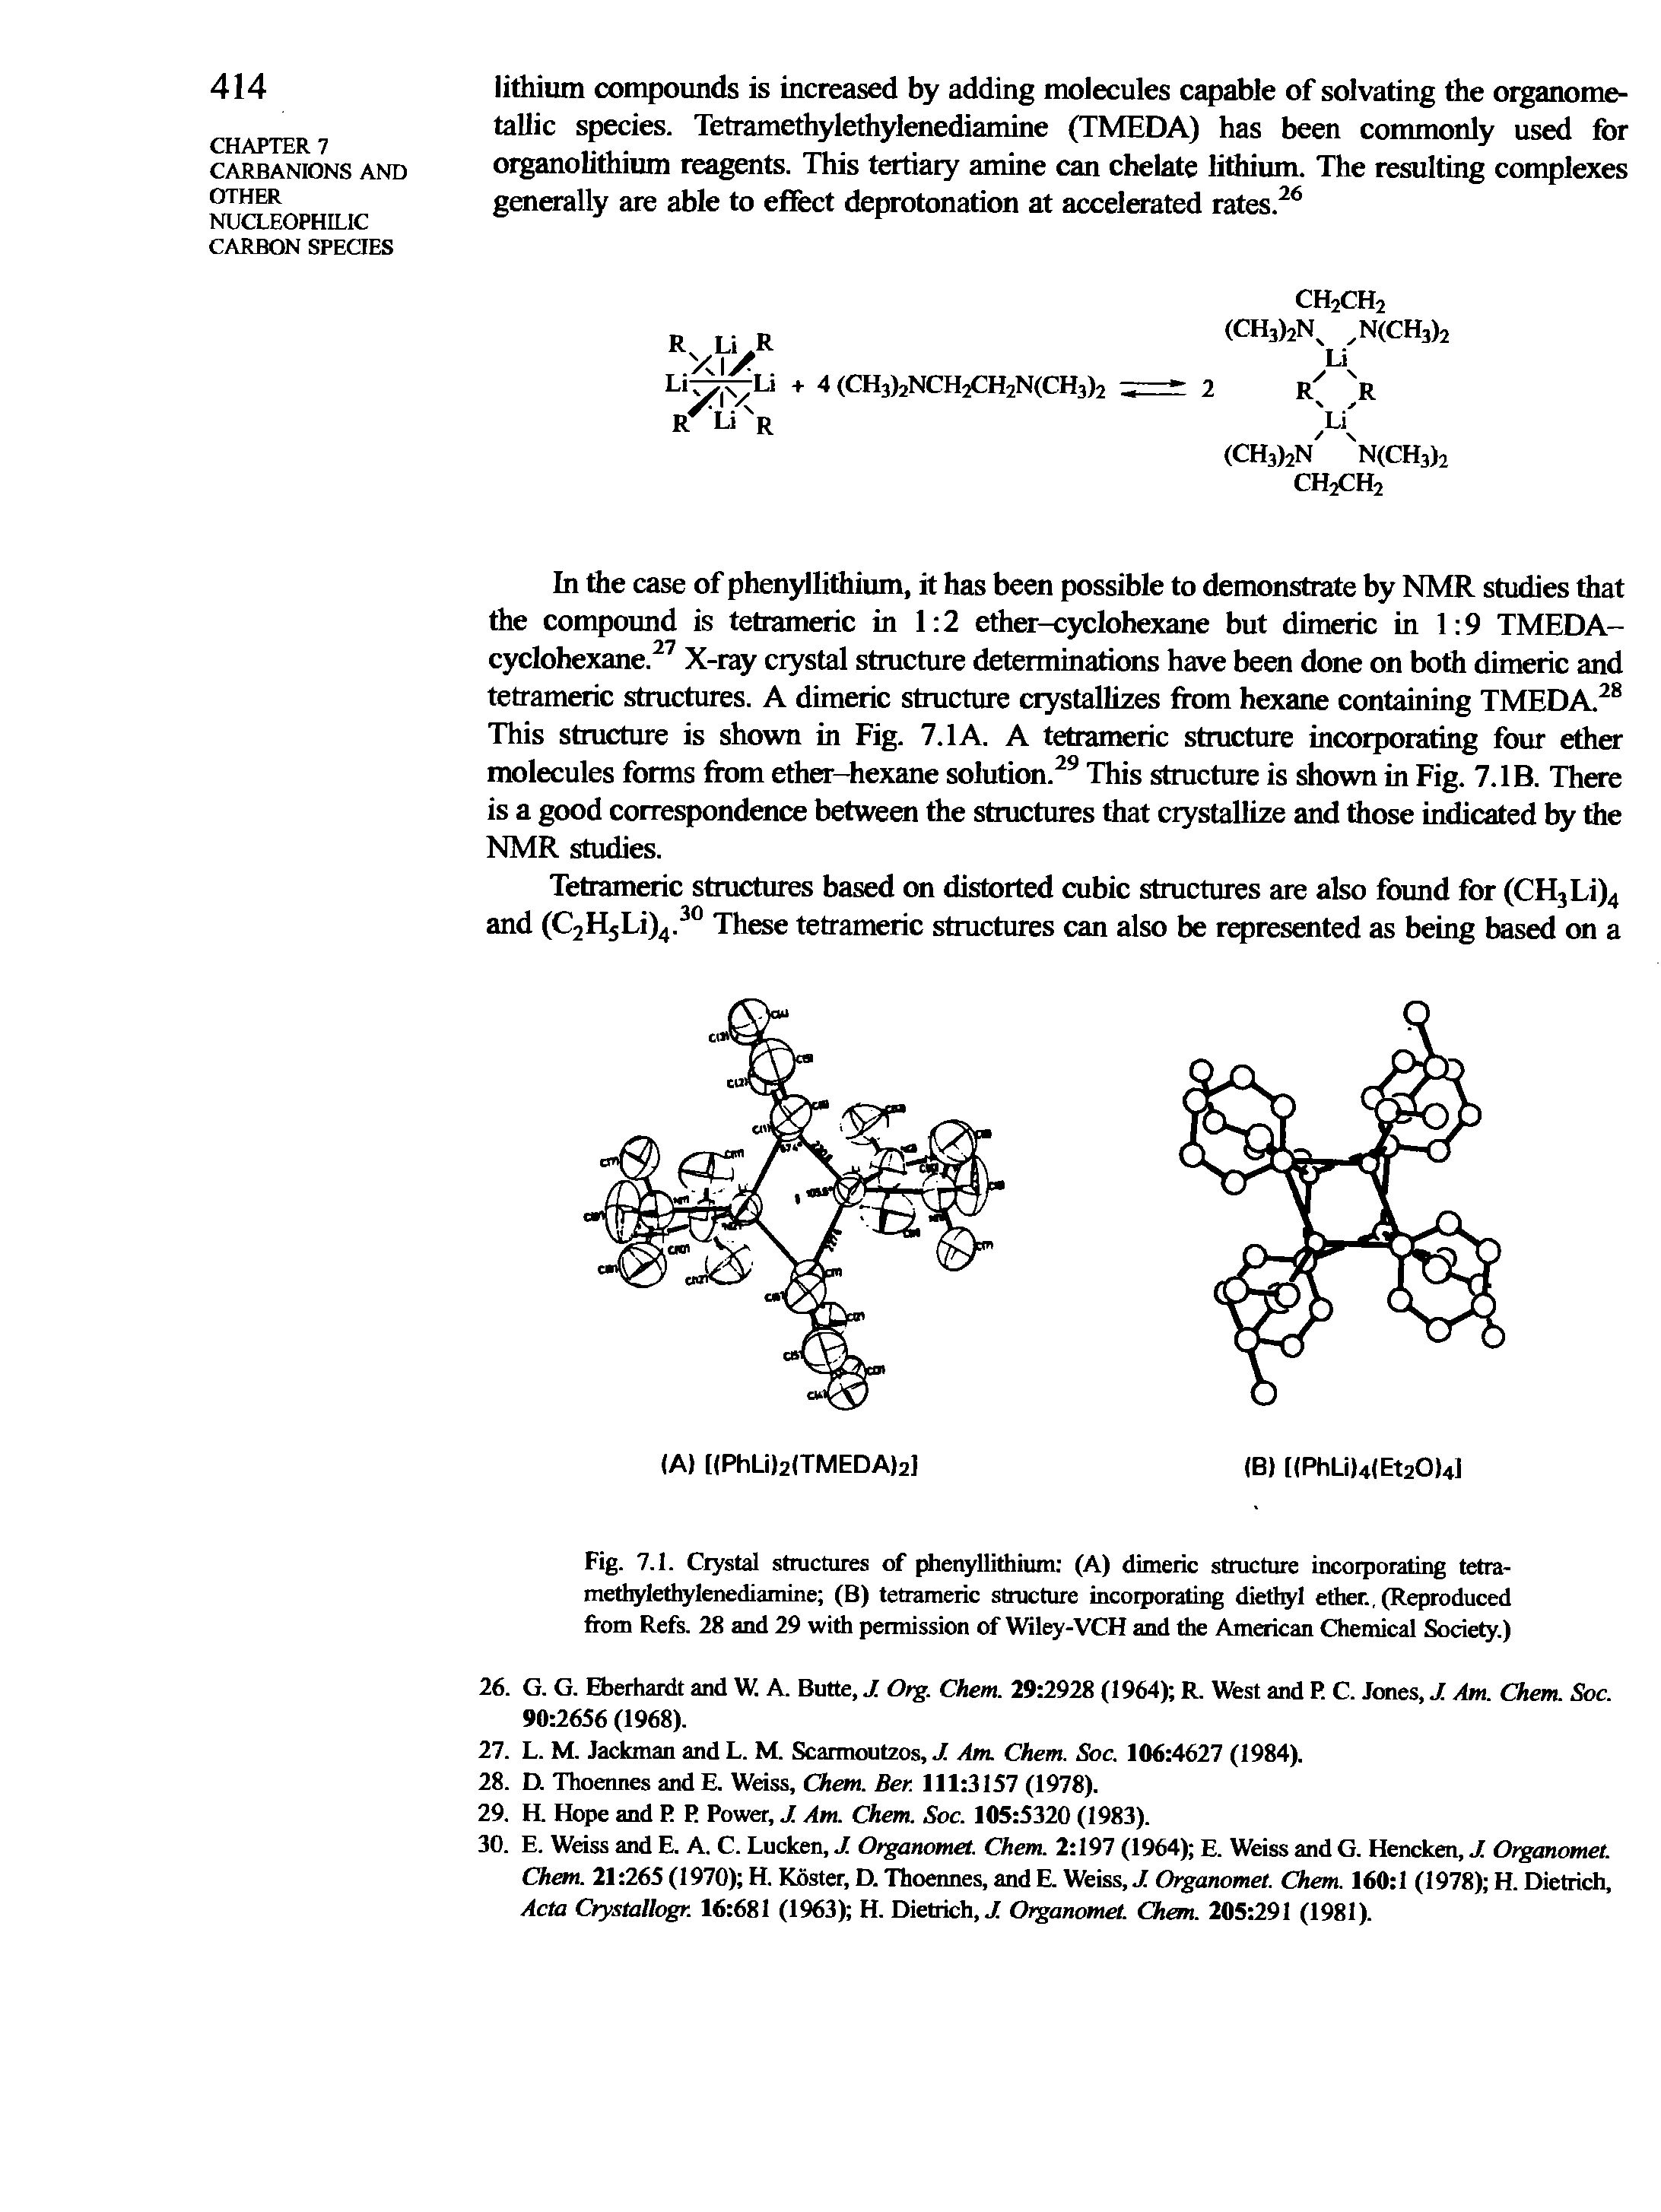 Fig. 7.1. Crystal structures of phertyllithium (A) dimeric structure incorporating tetra-methylethylenediamine (B) tetrameric structure incorporating dietl l ether., (Reproduced ftom Refs. 28 and 29 with permission of Wiley-VCH and the American Chemical Society.)...